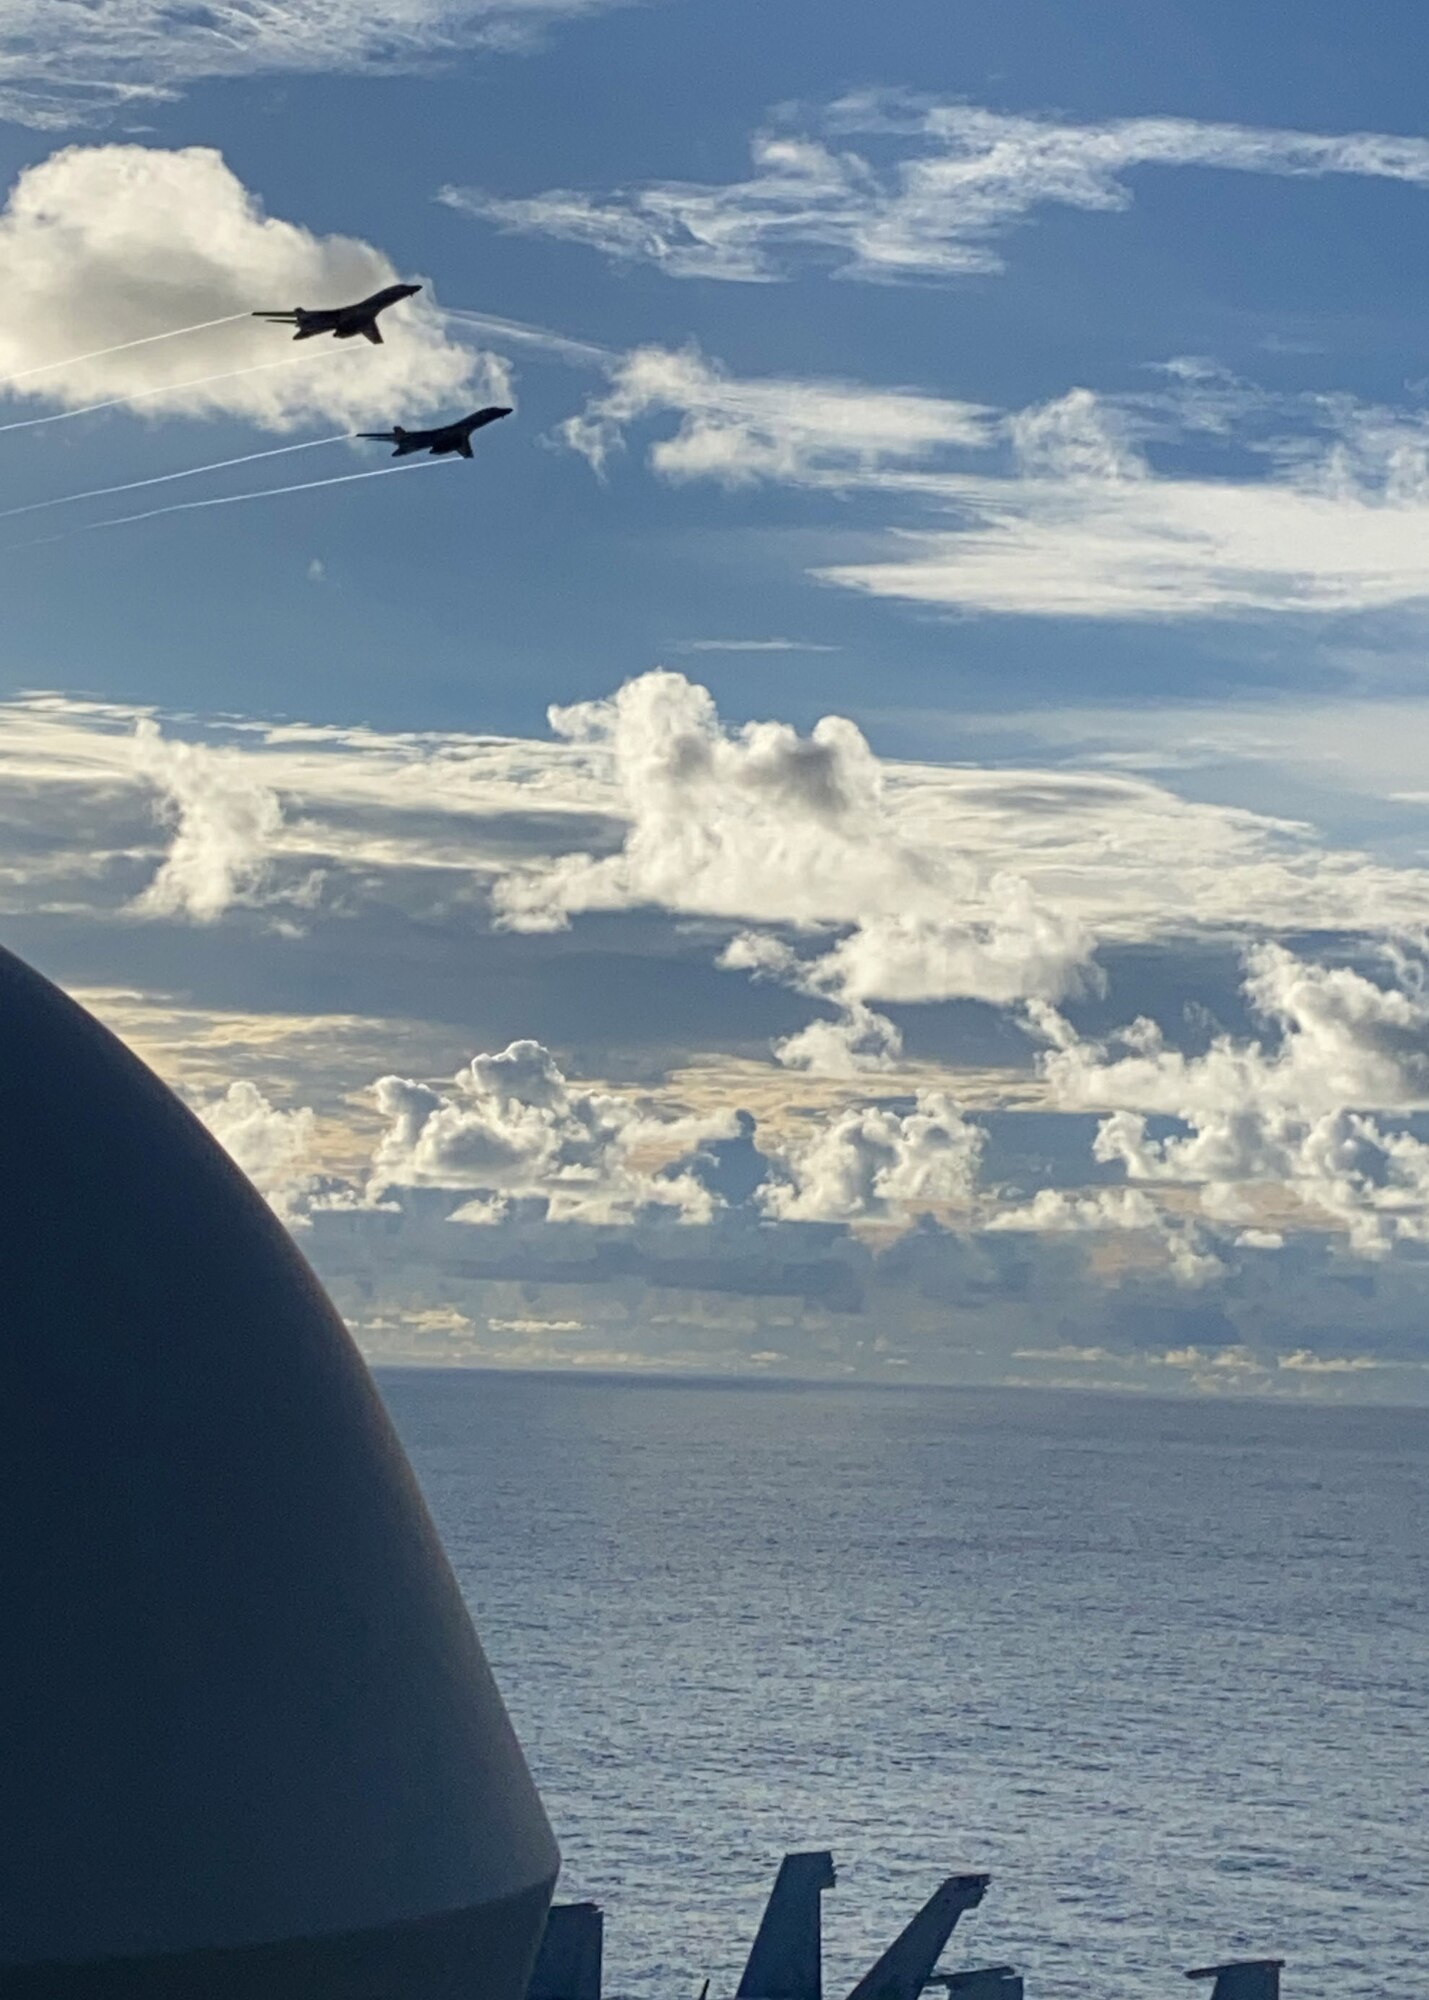 U.S. Air Force B-1B Lancers fly by the USS Ronald Reagan in the Philippine Sea during a Bomber Task Force mission, July 21, 2020. Strategic bomber missions contribute to the joint lethality and readiness of the U.S. Air Force and its allies and partners throughout the Indo-Pacific region. (Courtesy Photo by U.S. Navy)